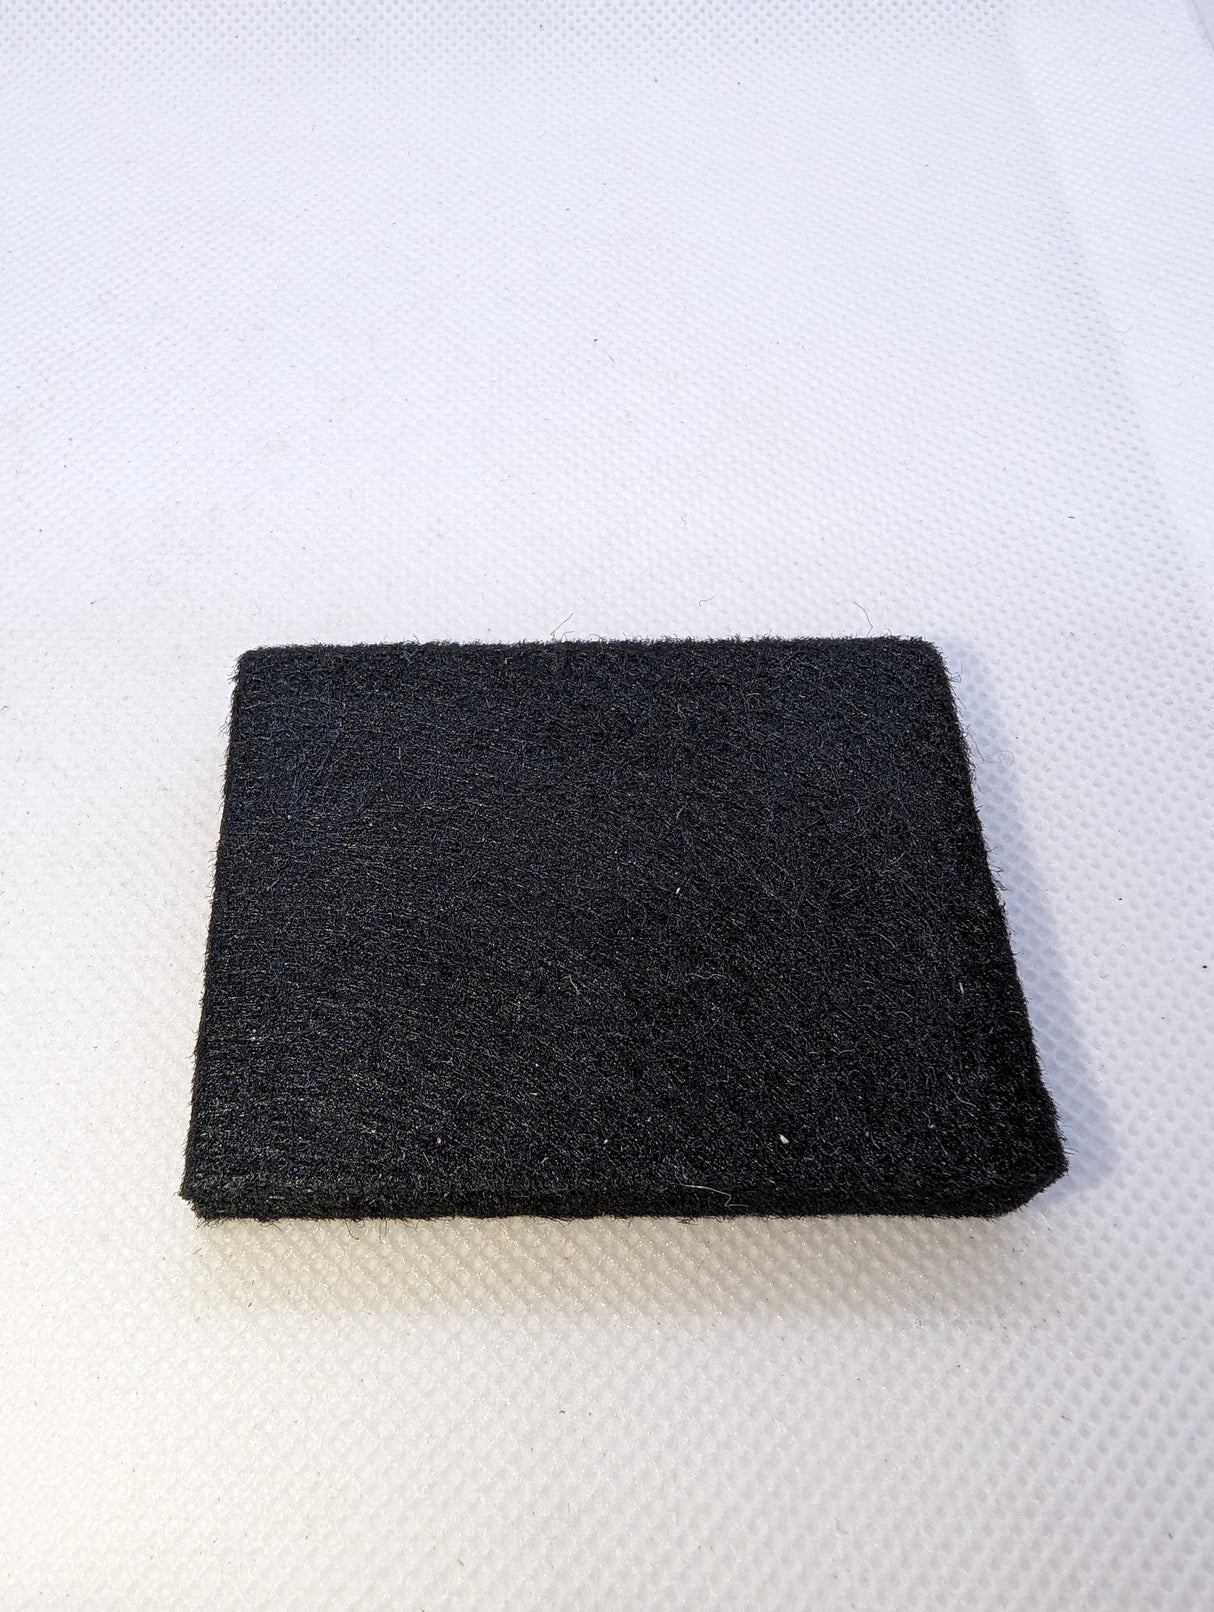 PolyColour Black Pinboard Fire Rated 2440x1220x9mm (Sundeala Replacement)